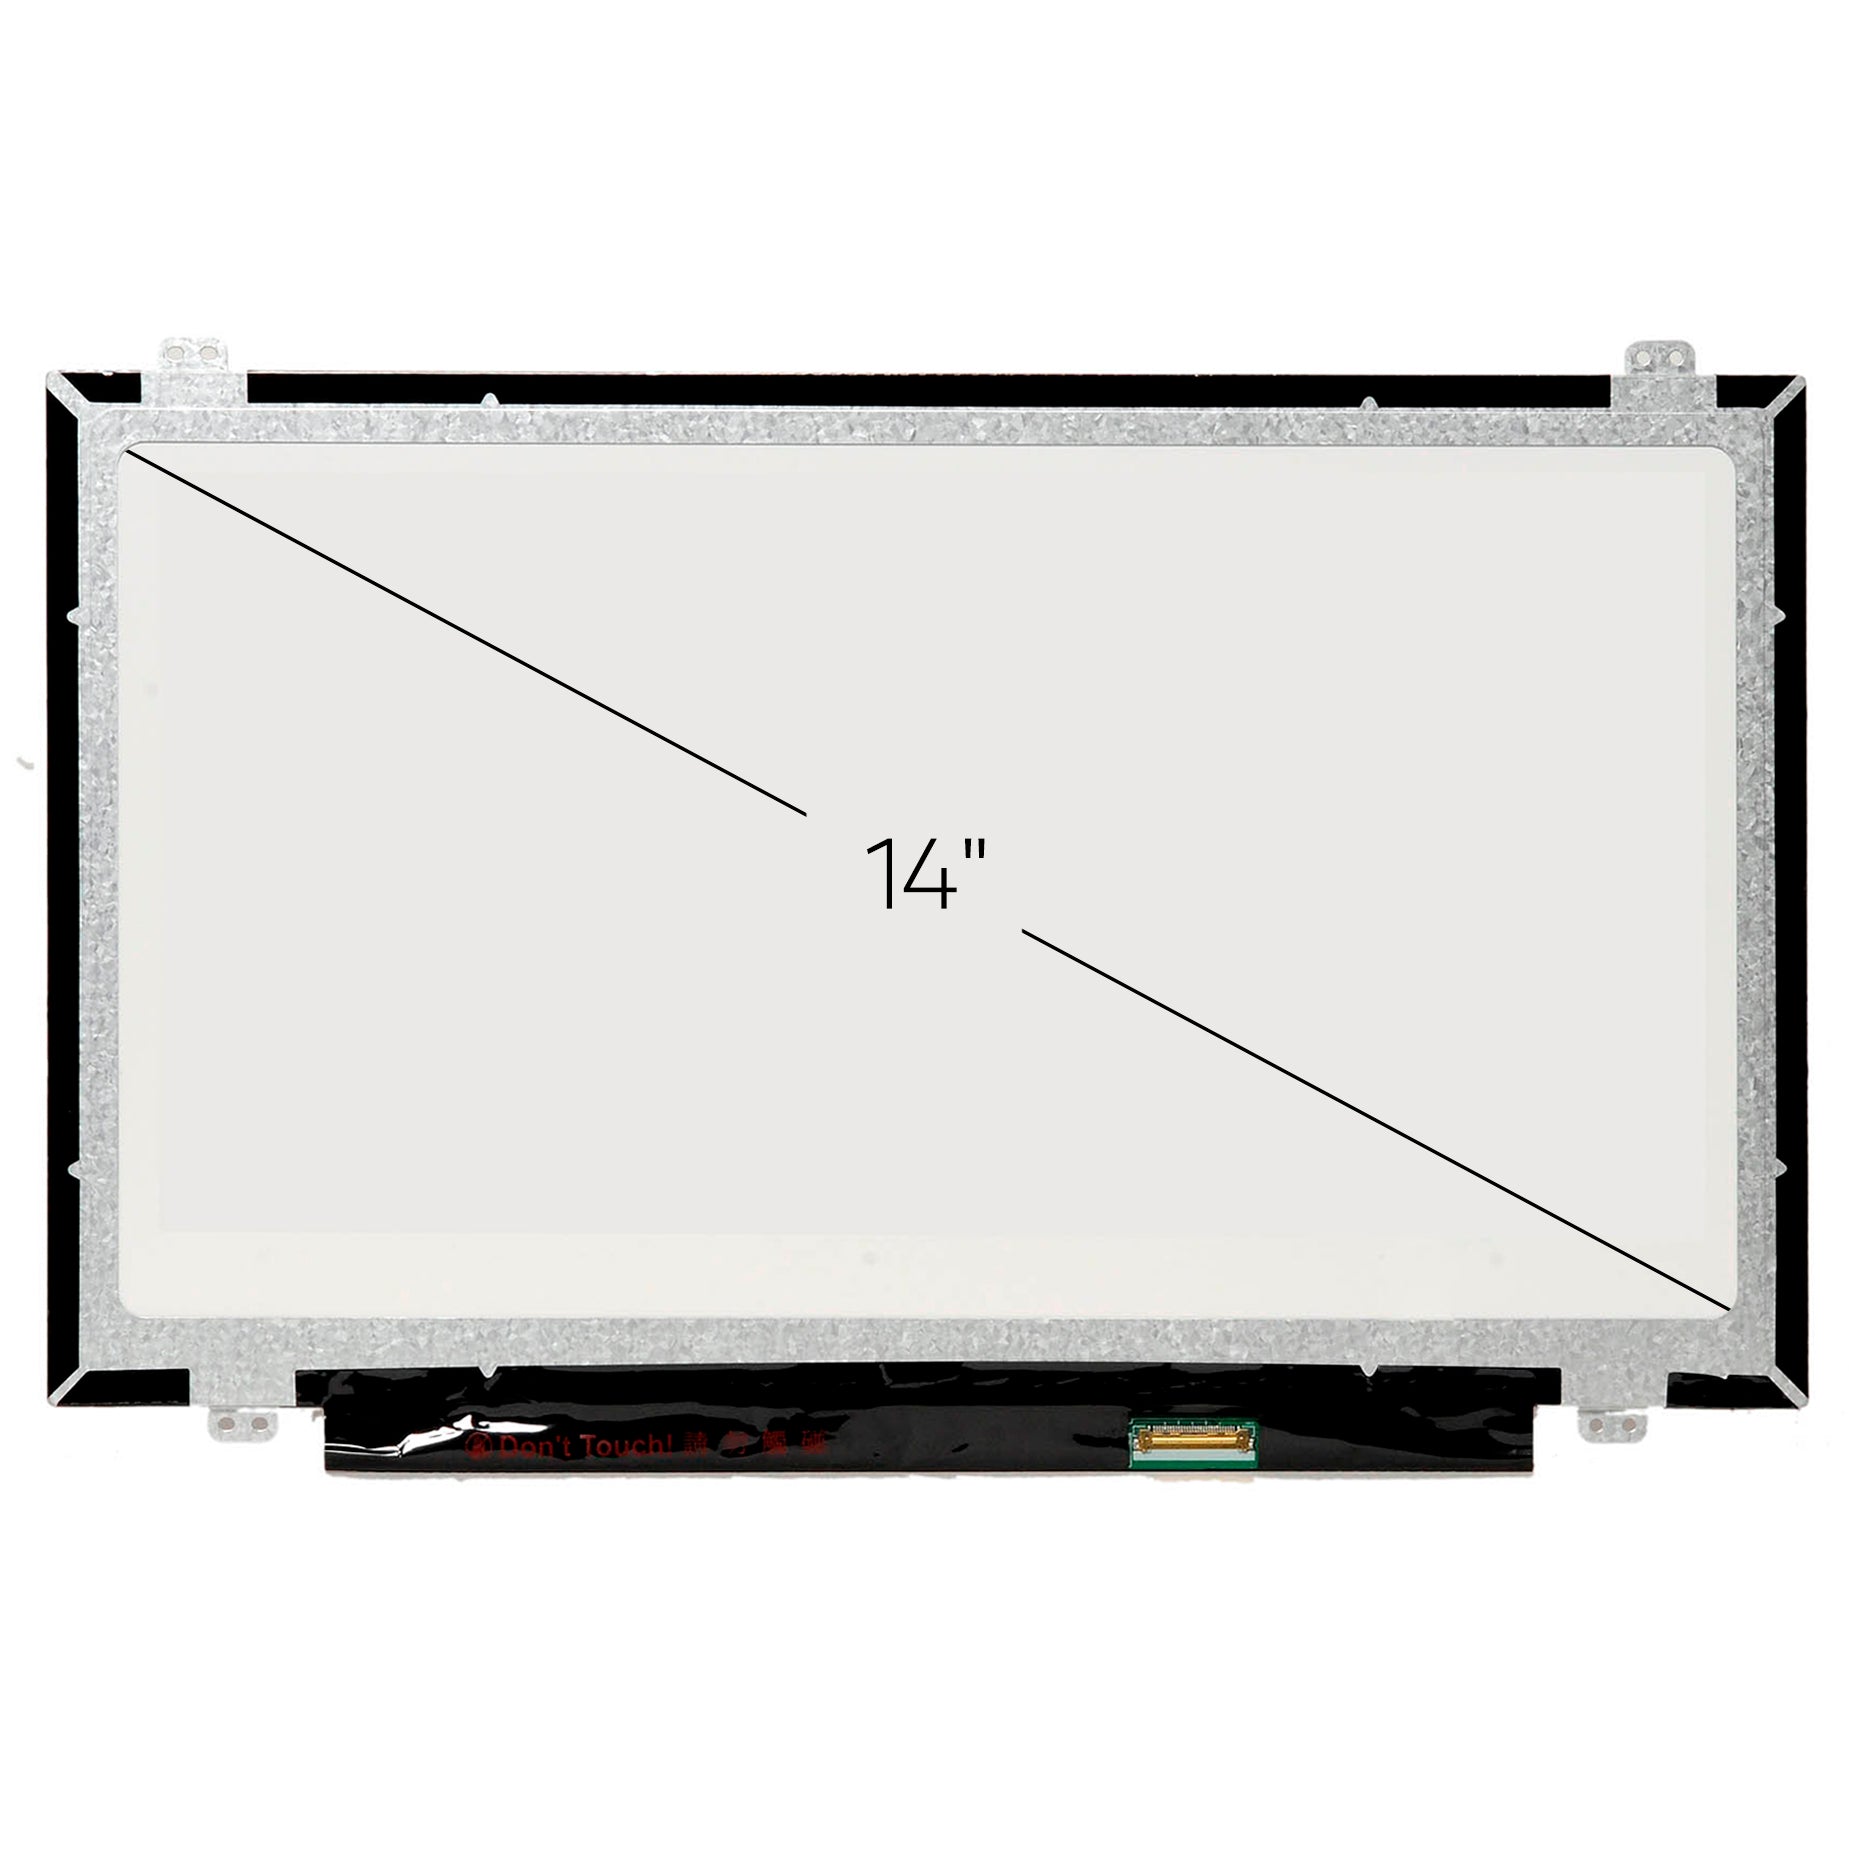 Screen Replacement for HP Probook 440 G6 HD 1366x768 Glossy LCD LED Display